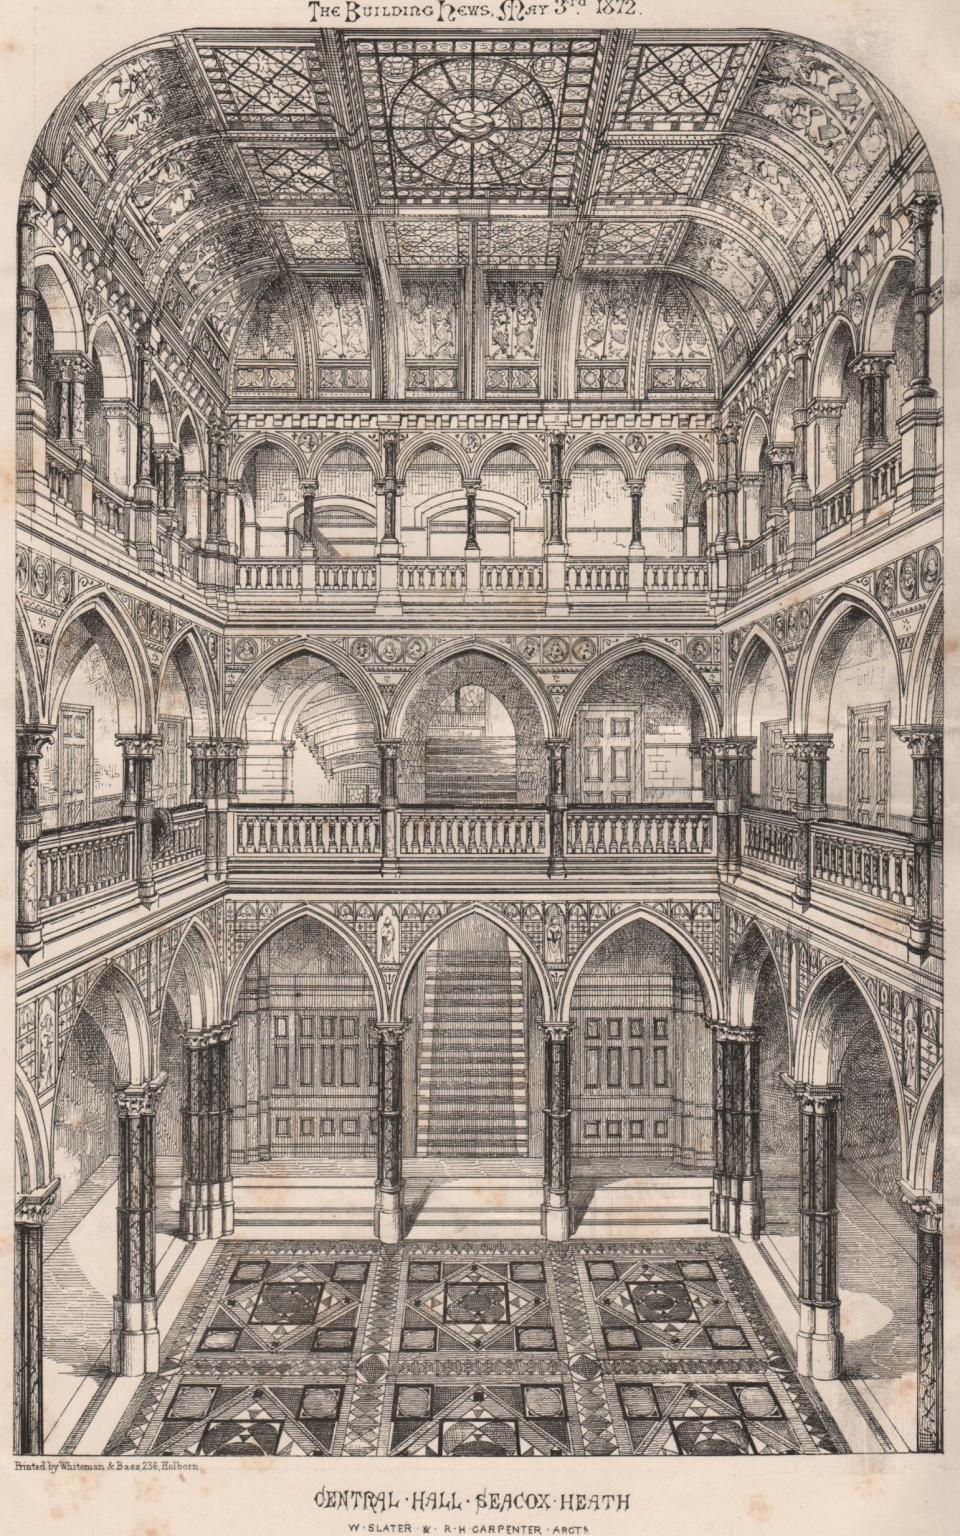 The central hall at Seacox Heath as shown in the architects' drawings